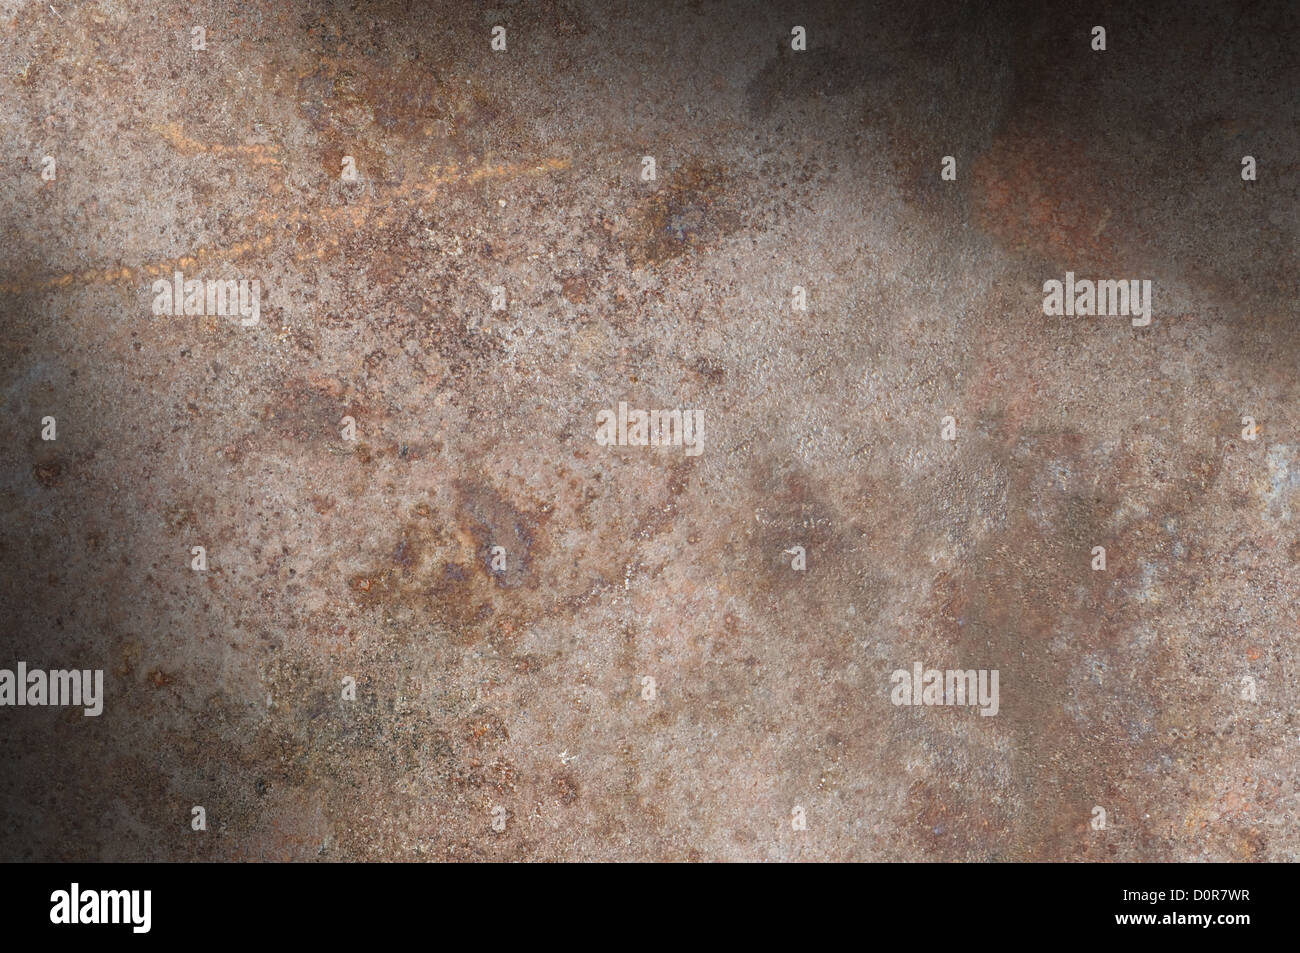 Grungy distressed iron surface seamlessly tileable texture Stock Photo